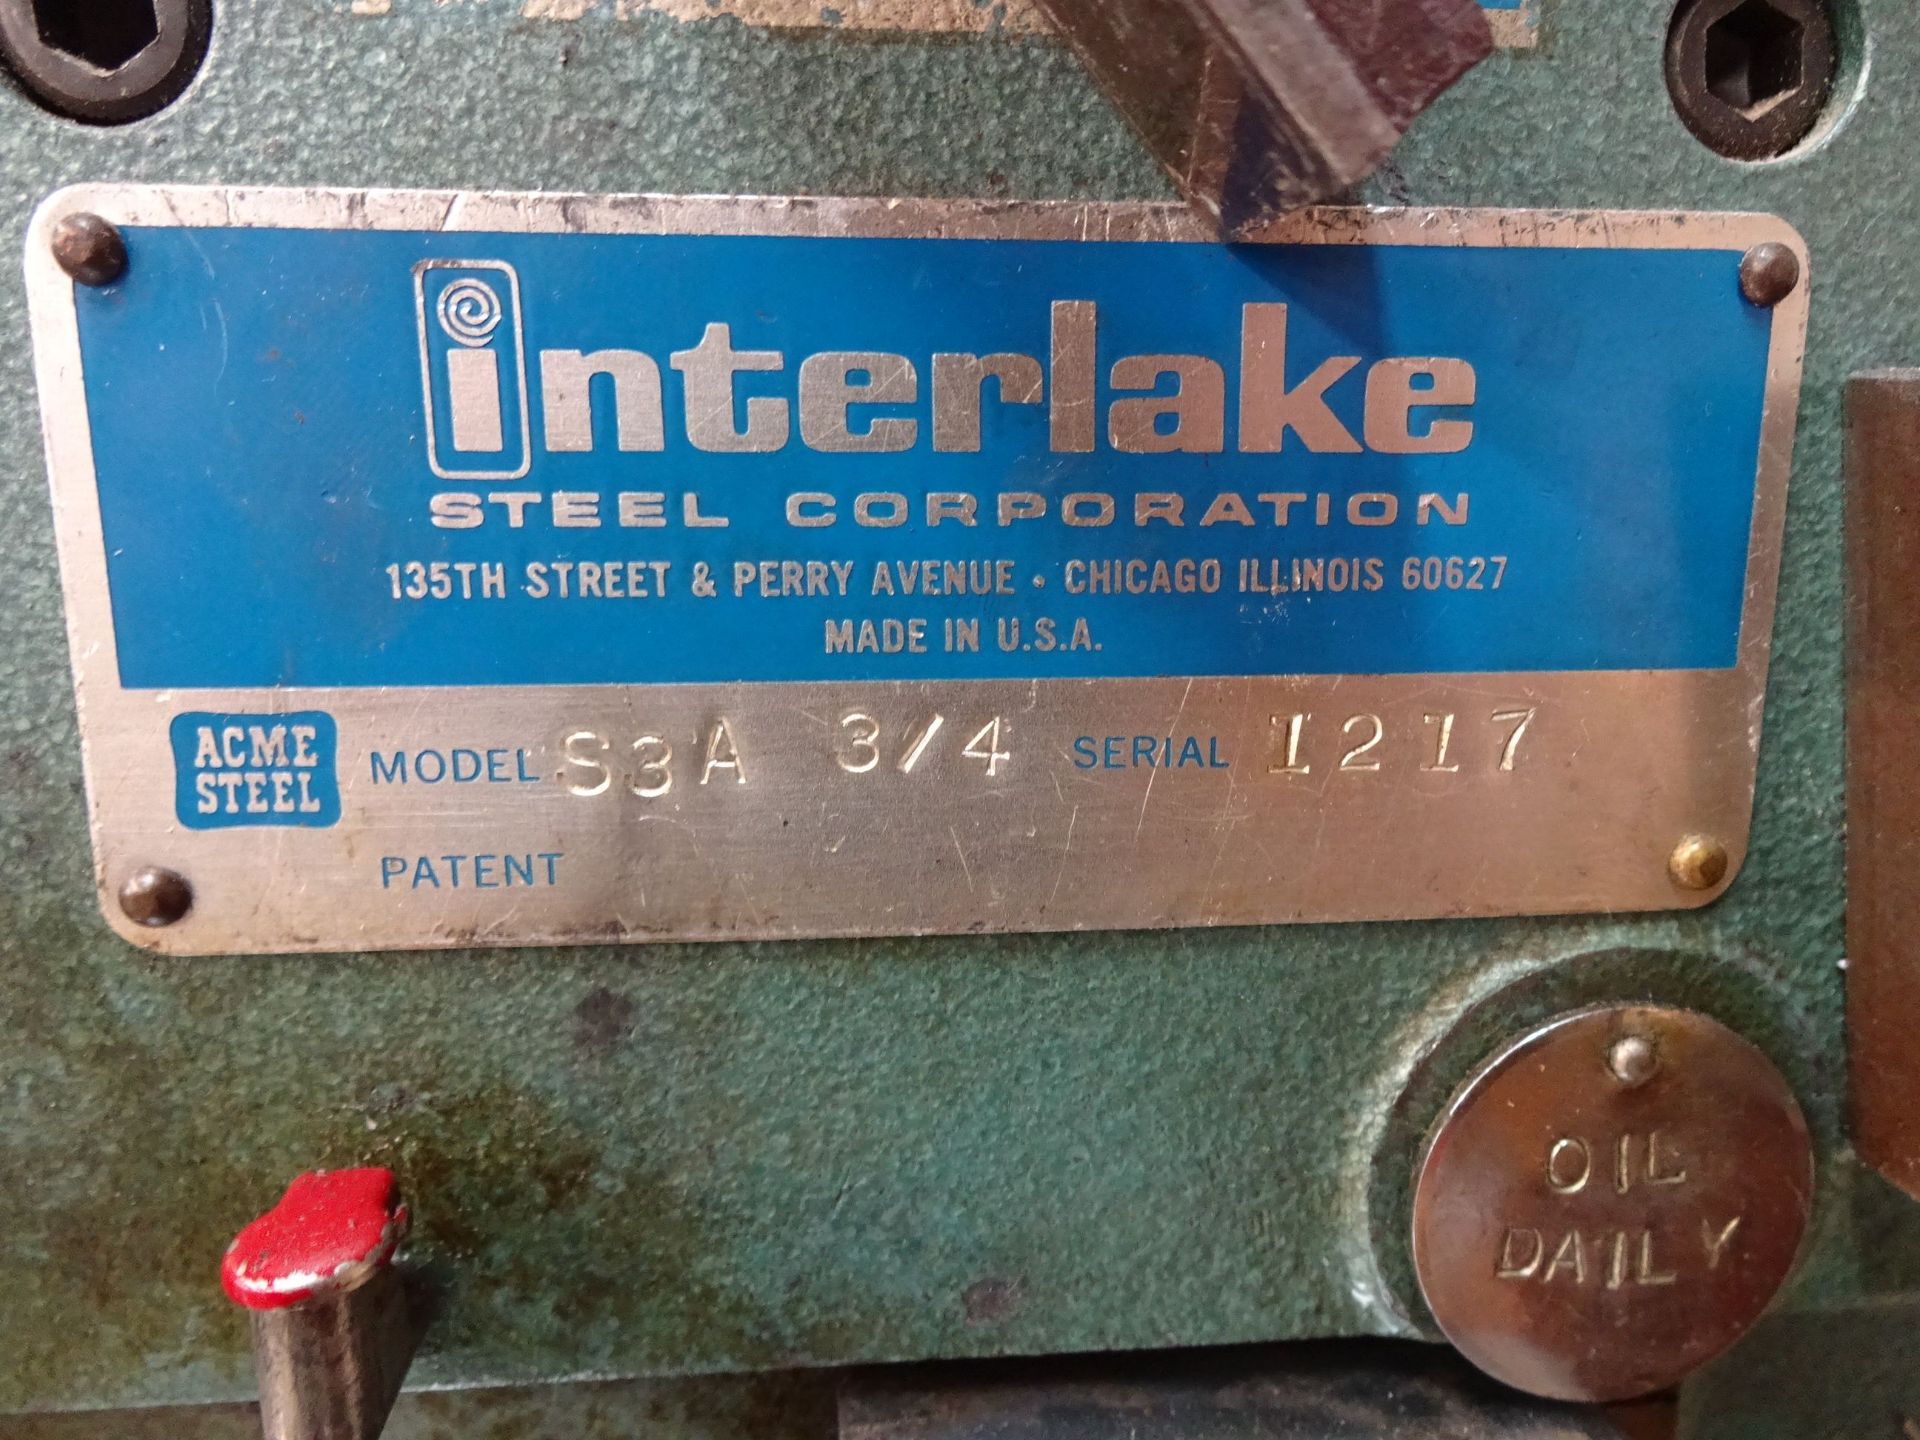 INTERLAKE MODEL S3A 3/4 SINGLE HEAD STITCHER; S/N 1217 - $75.00 LOADING COST DUE DIRECTLY TO BOGNER - Image 3 of 4